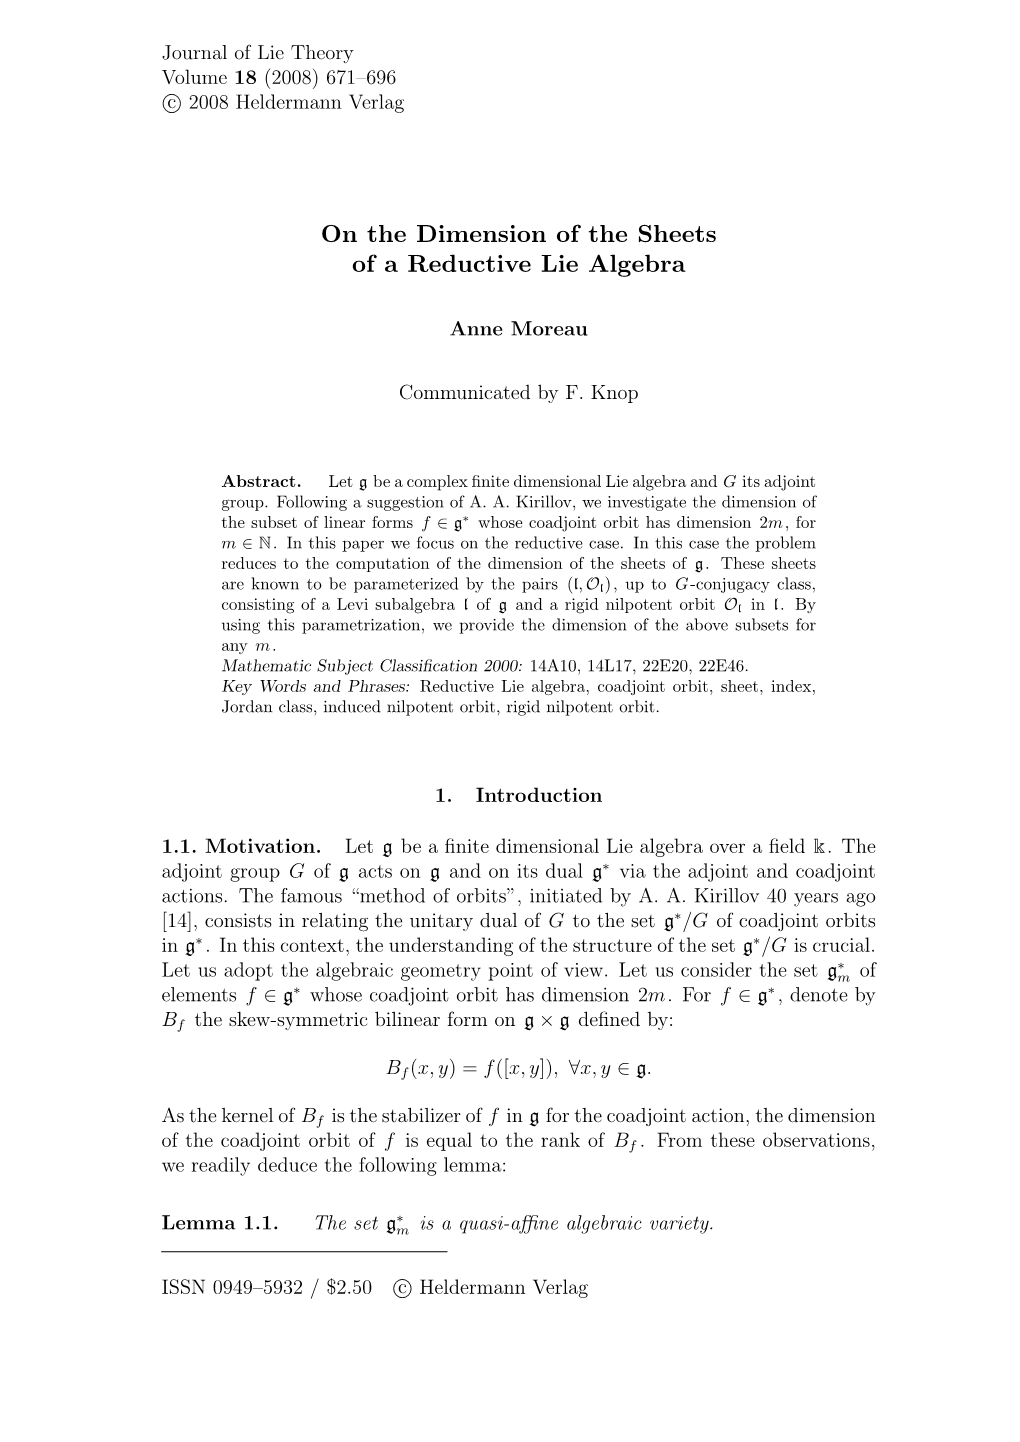 On the Dimension of the Sheets of a Reductive Lie Algebra